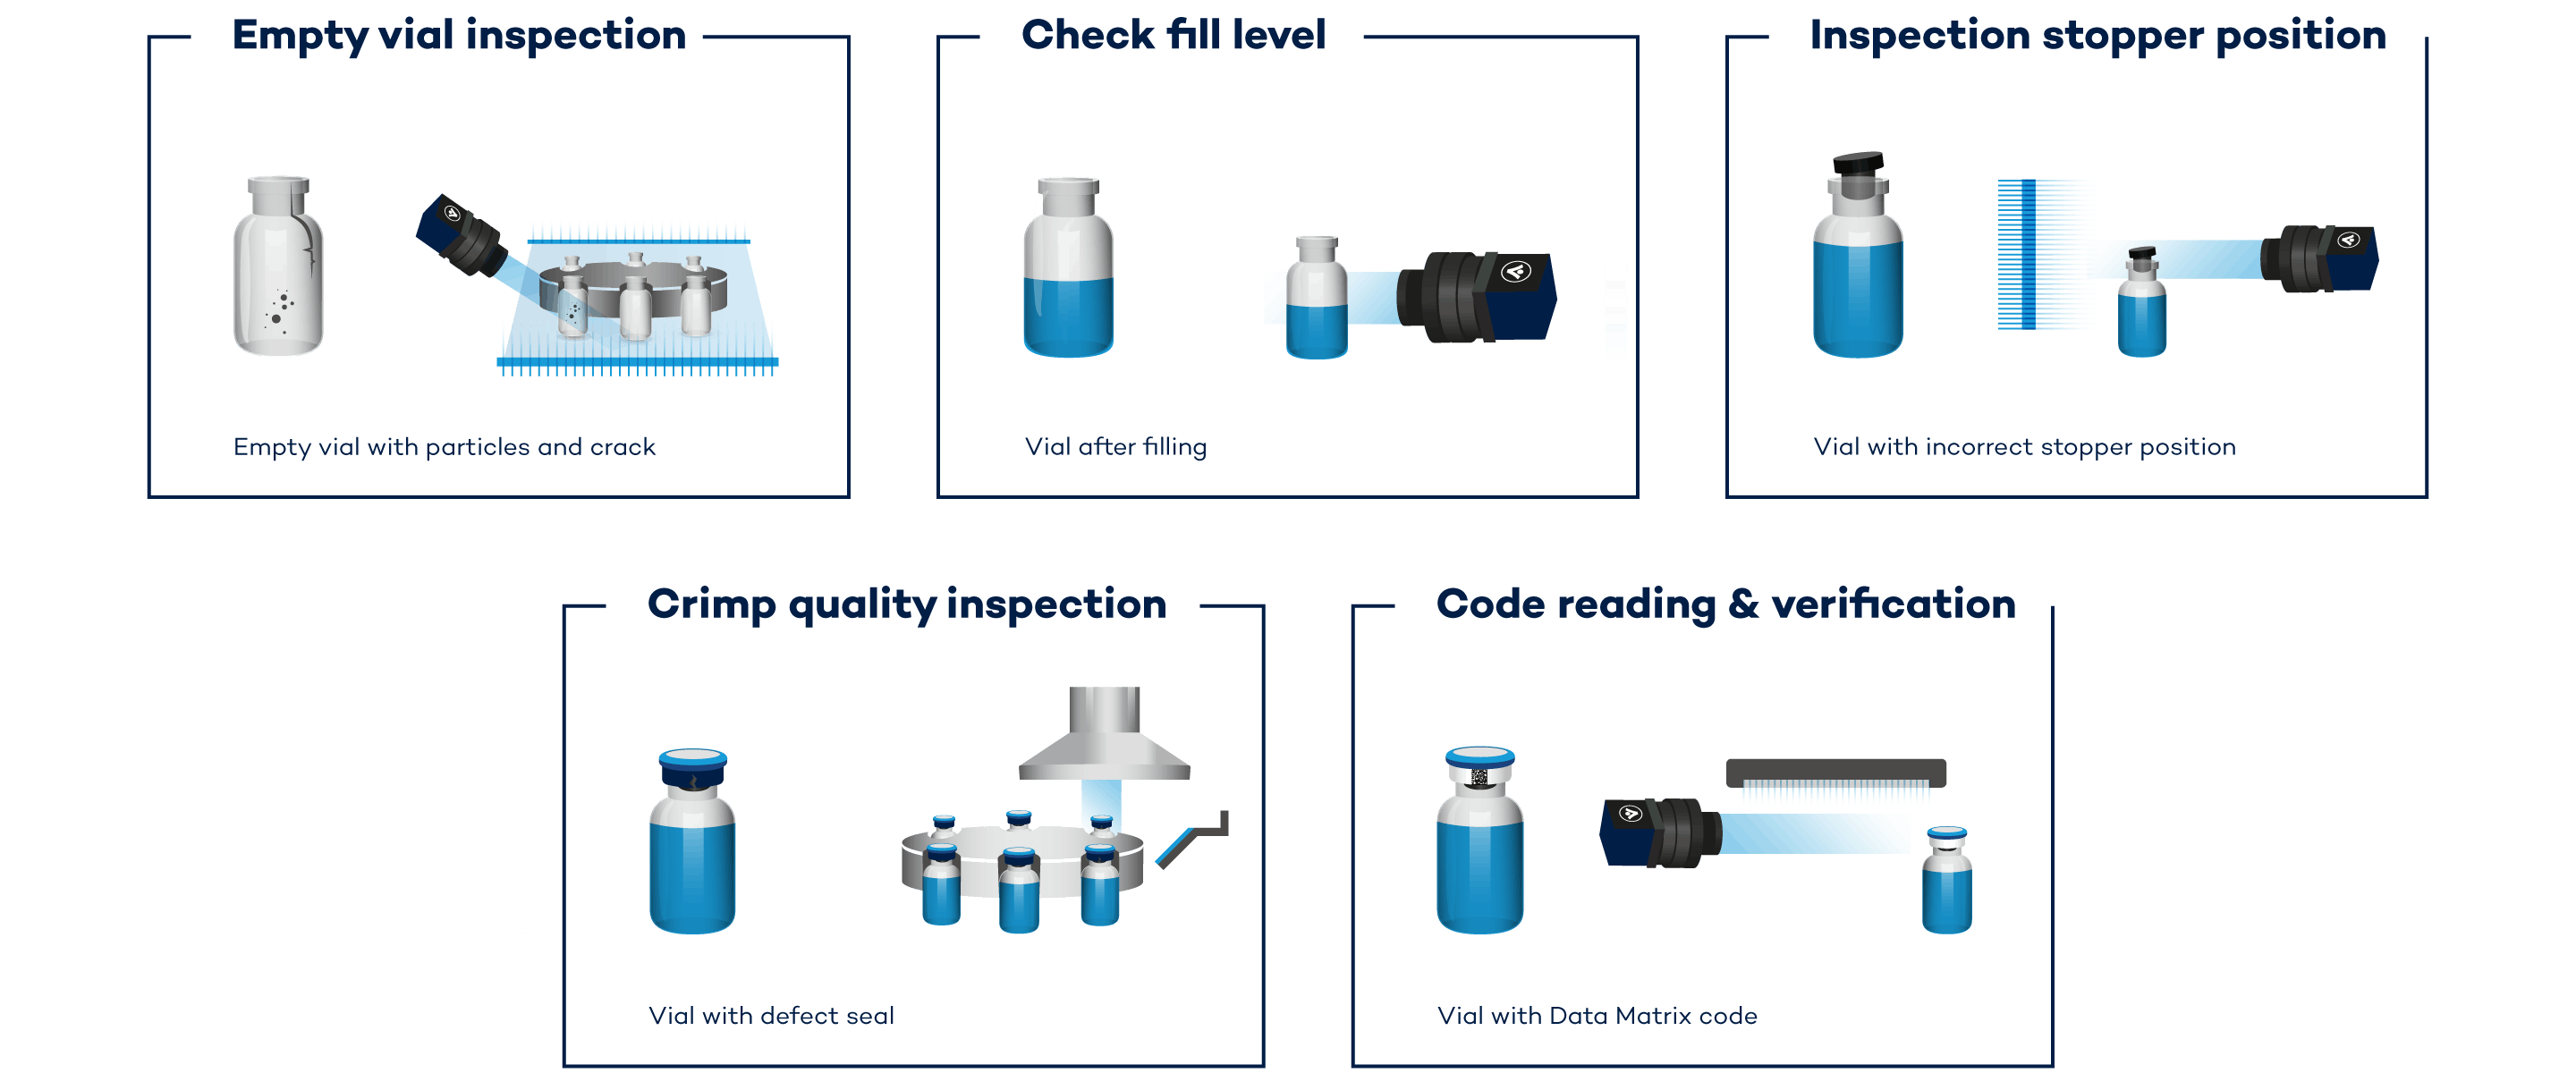 Process Controll in Vial Inspection